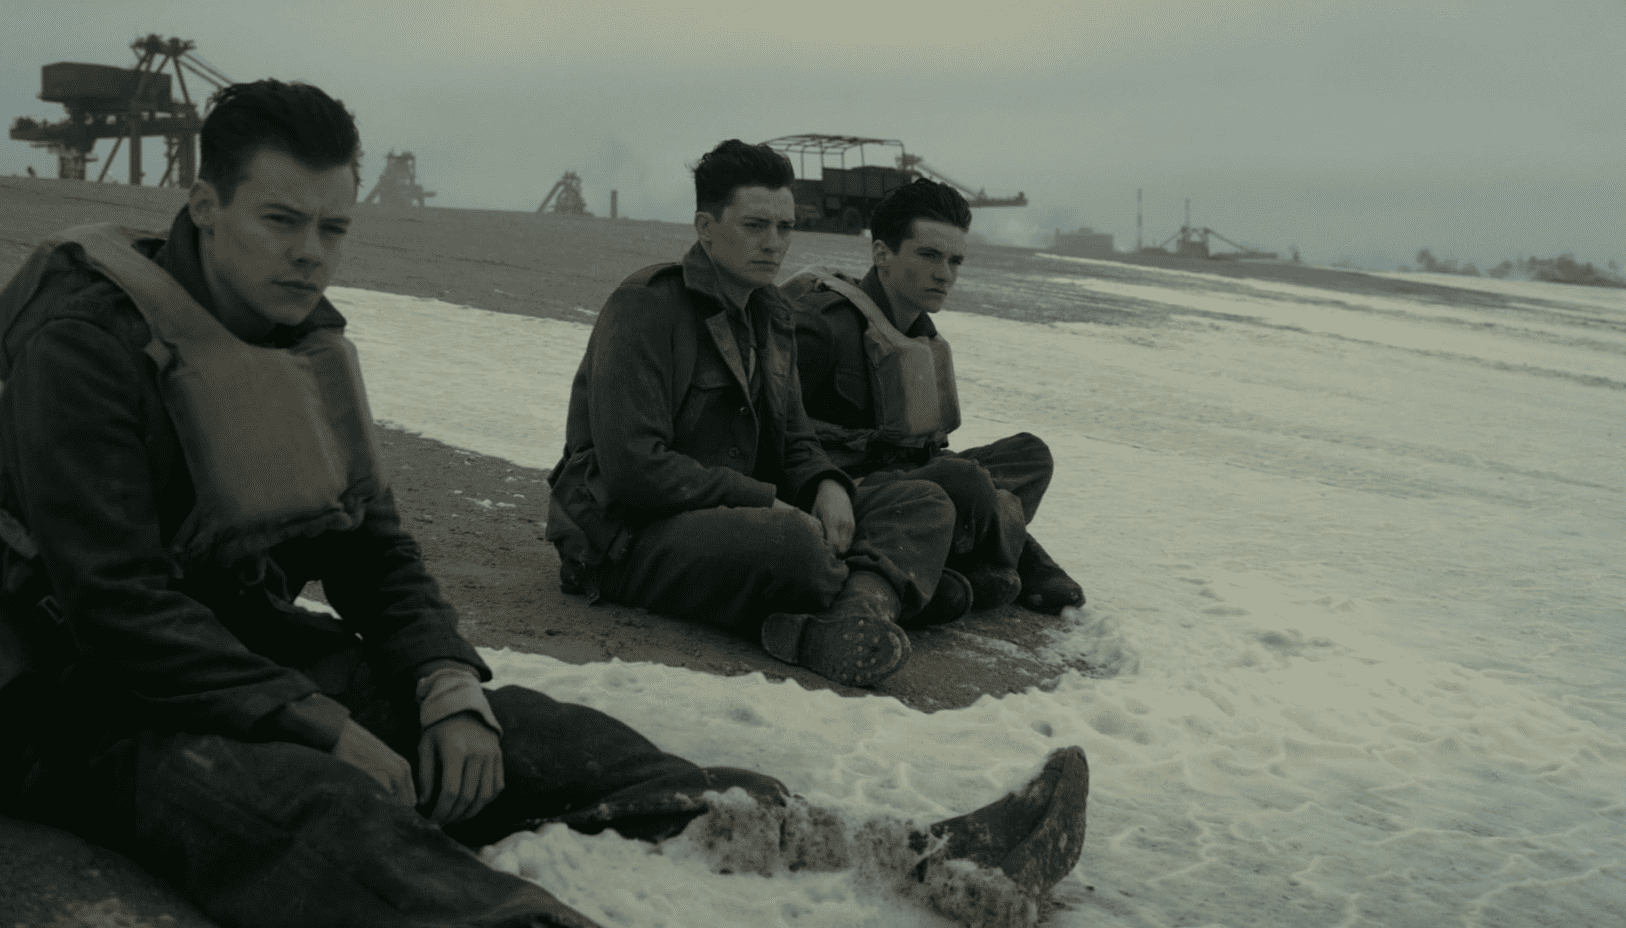 Harry Styles sitting in the foreground of a beach dressed in military uniform while two other soldiers sit farther back in this image from Warner Bros. Pictures